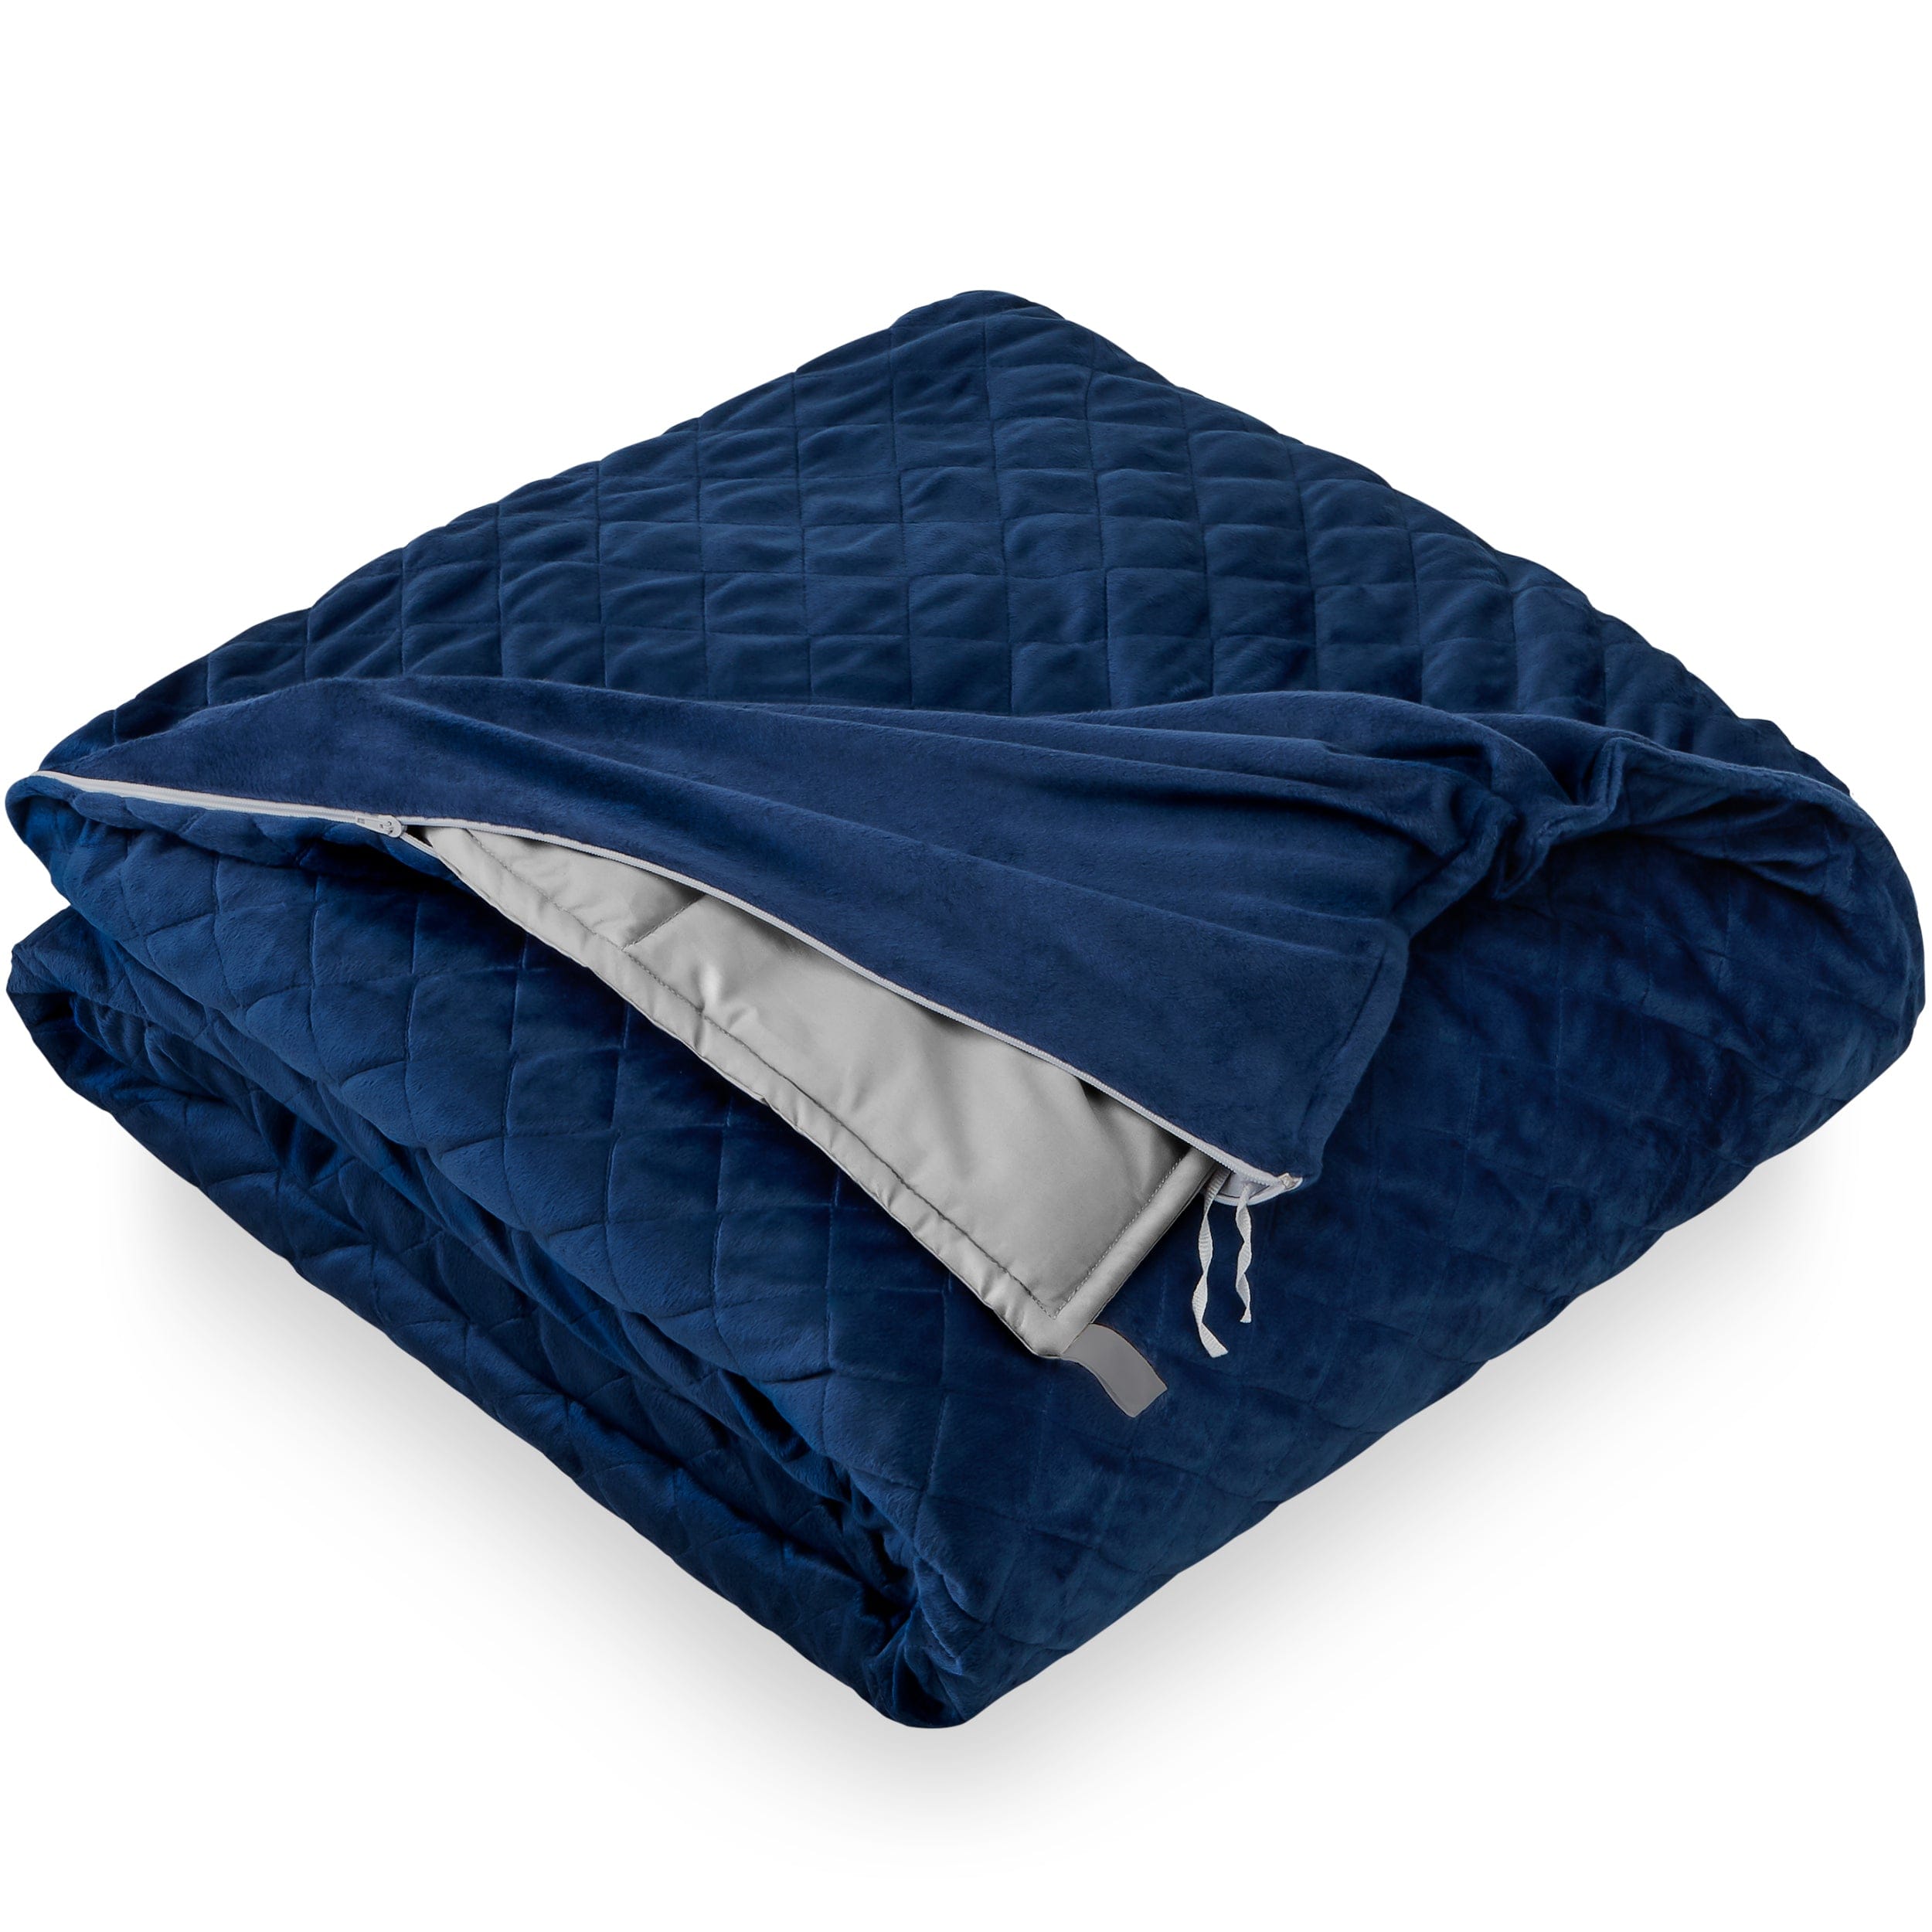 A grey weighted blanket is inside a dark blue cover and the blanket is slightly pulled out. The blanket is folded.